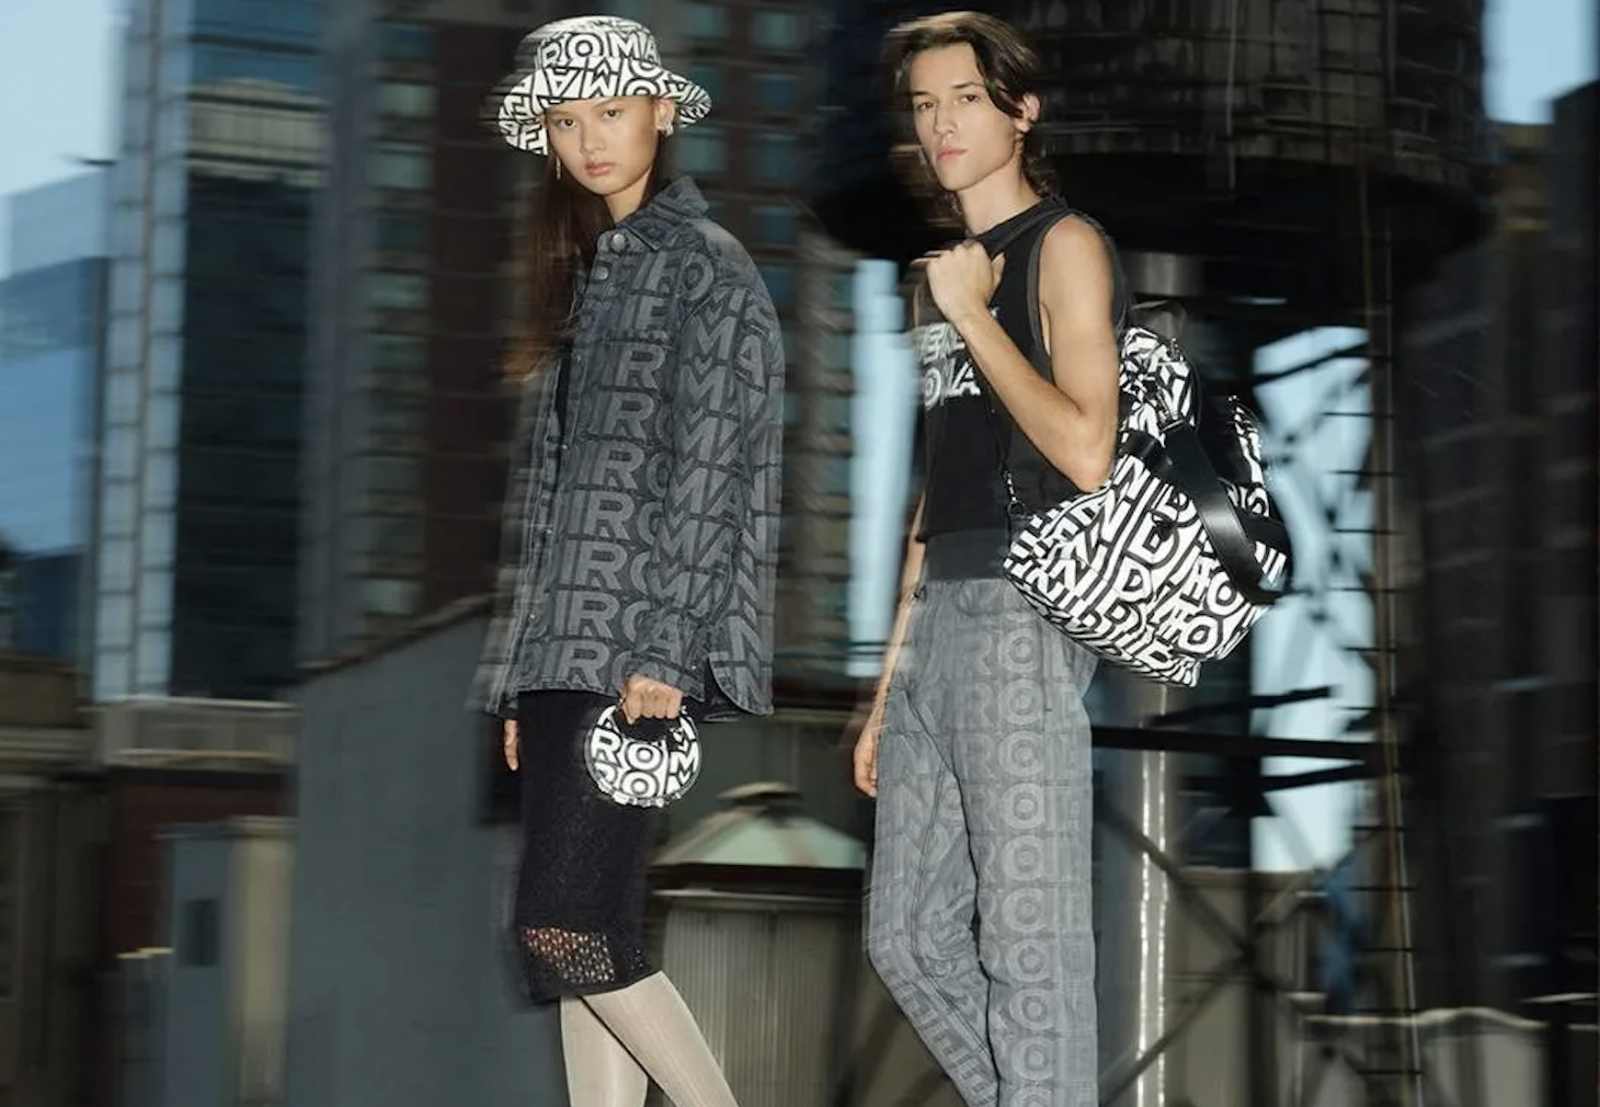 Two models wearing the Fendi, Marc Jacobs collection